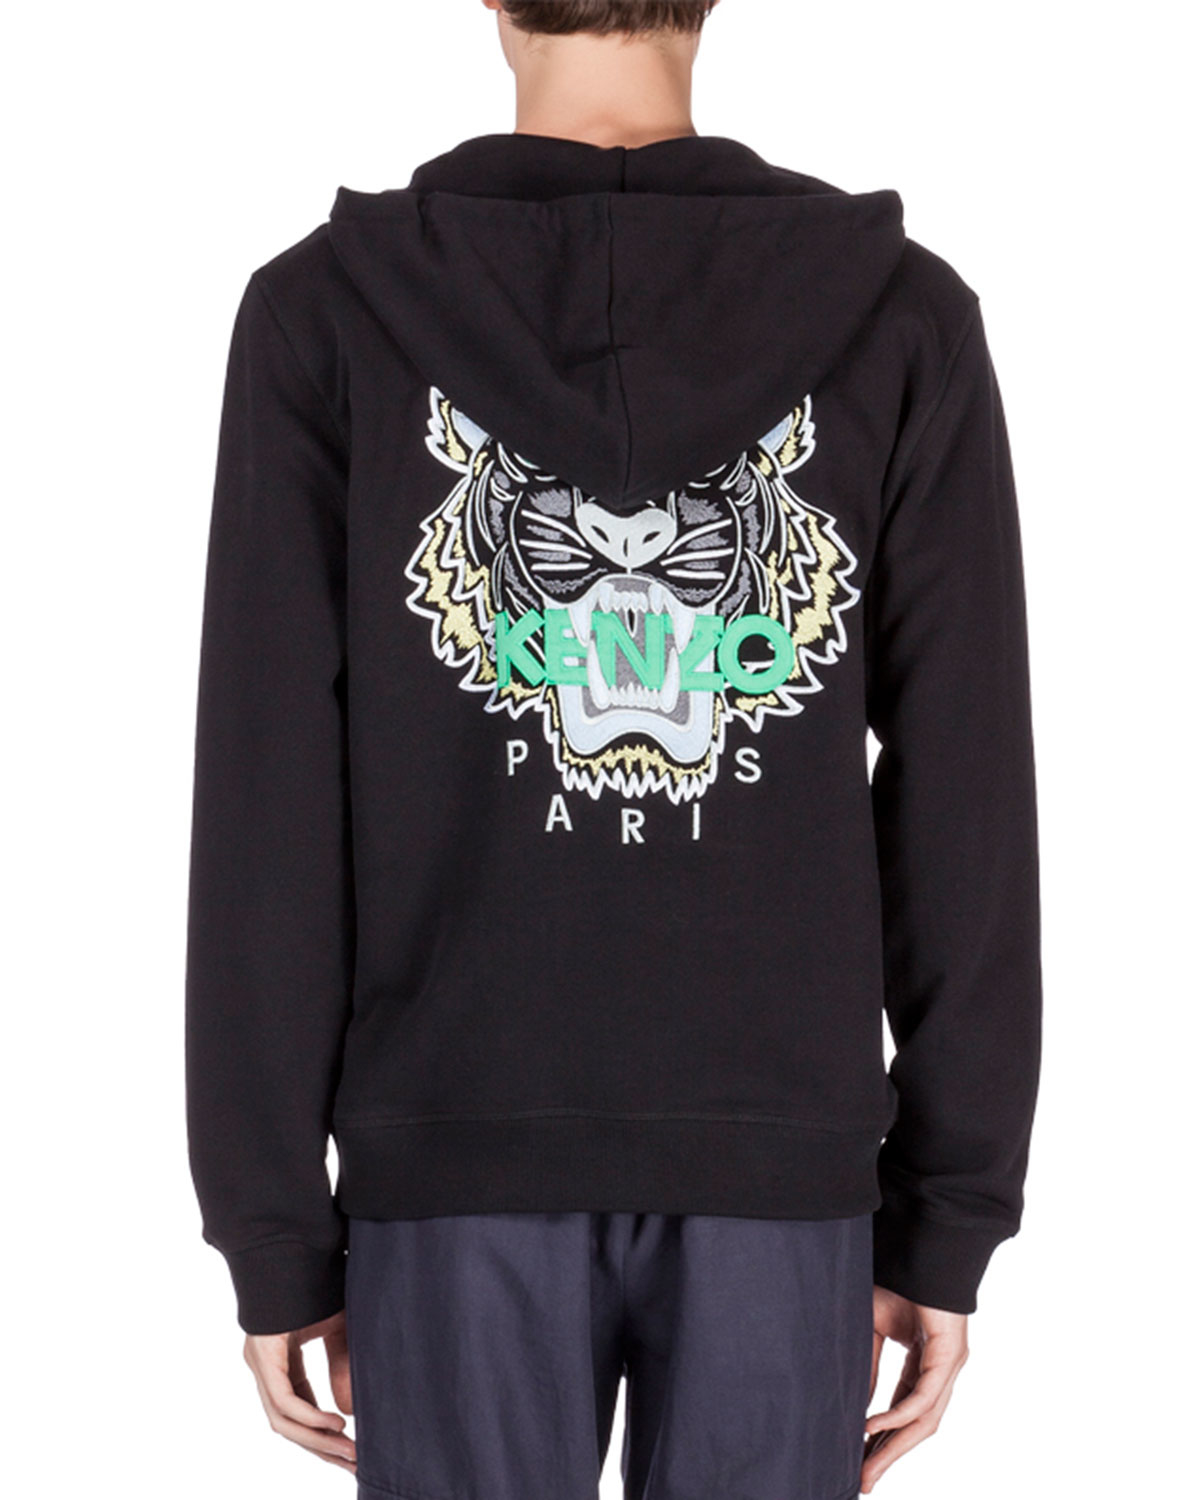 Lyst - Kenzo Zip-up Hoodie With Embroidered Tiger Icon in Black for Men